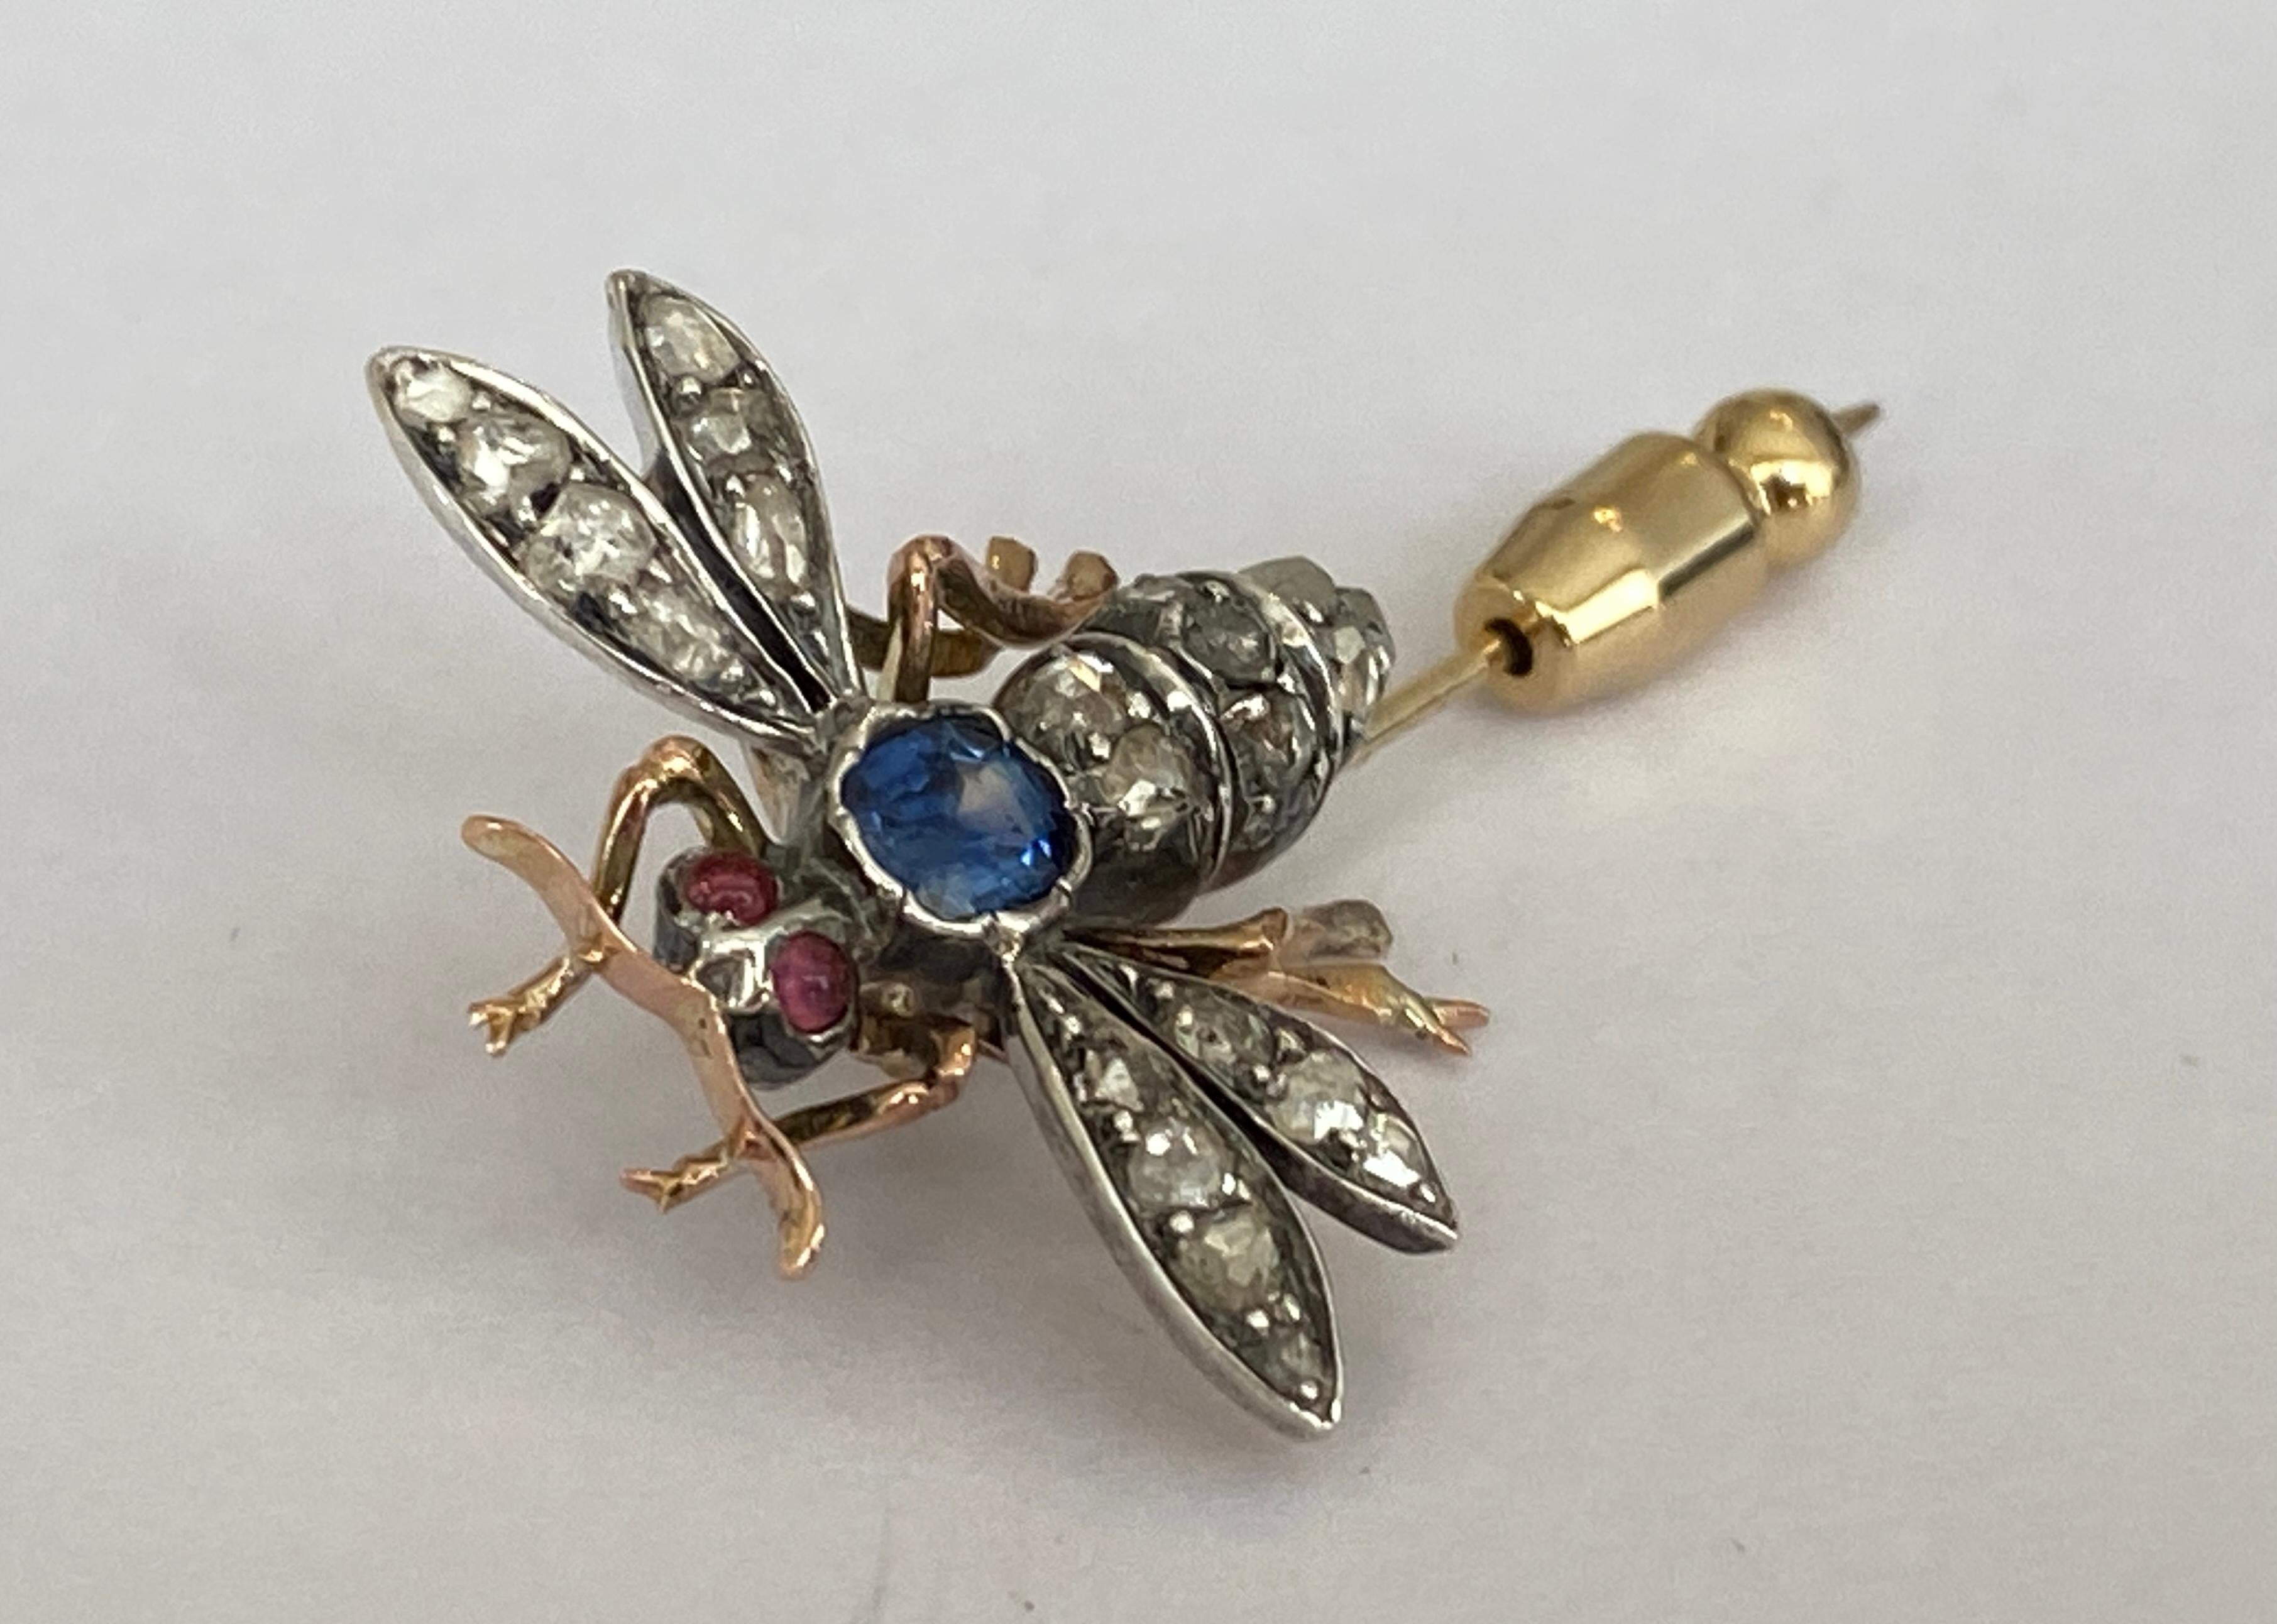 This nice antique butterfly brooch is made of 14 kt yellow gold and silver. The brooch is richly decorated with rose cut diamonds of in total approx. 0.65 ct, and 1 emerald cut sapphire approx. 0.40 crt. The eyes of the butterfy are set with 2